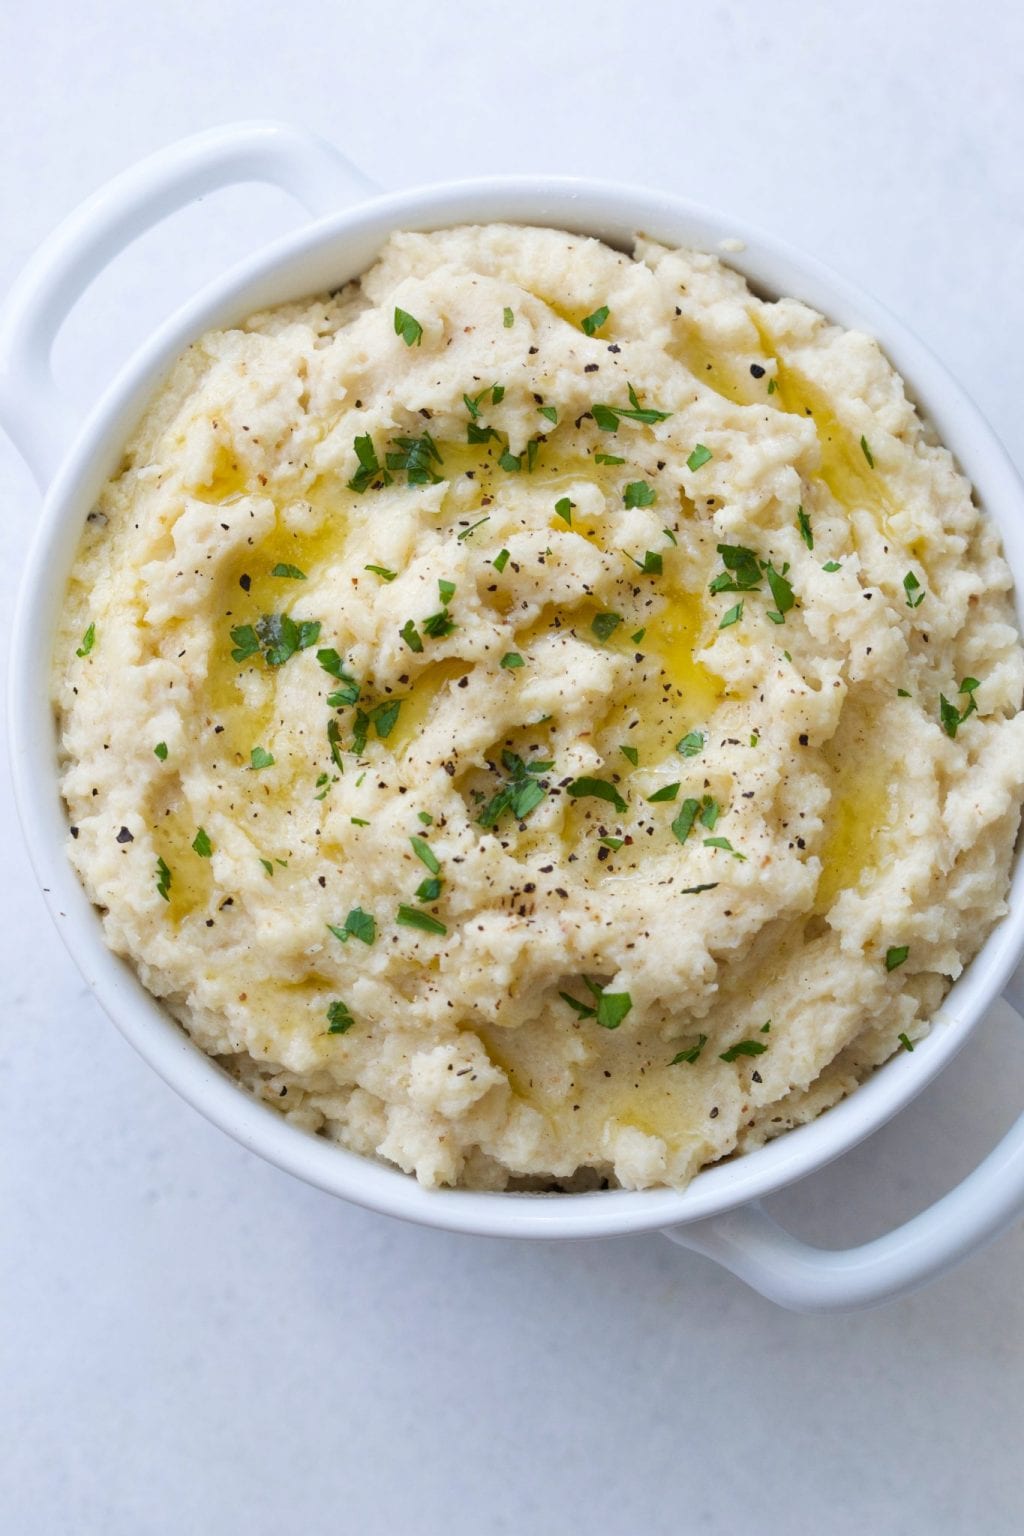 Top 30 Whole30 Side Dishes - Every Last Bite